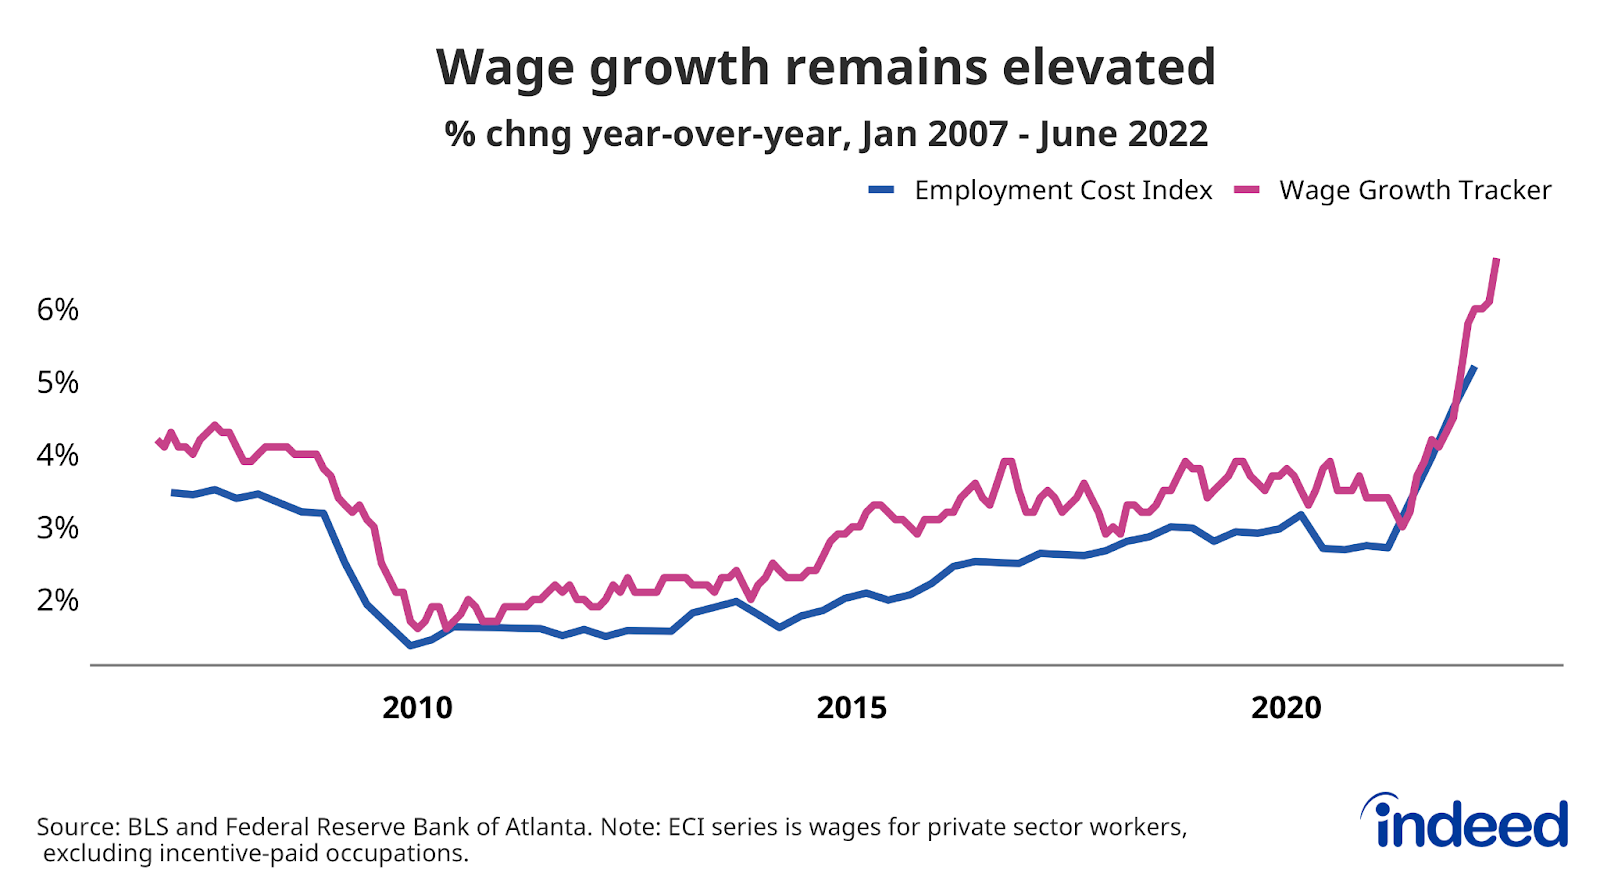 Line graph titled “Wage growth remains elevated” with a vertical axis ranging from 2% to 6% and a horizontal axis that covers January 2007 to June 2022.